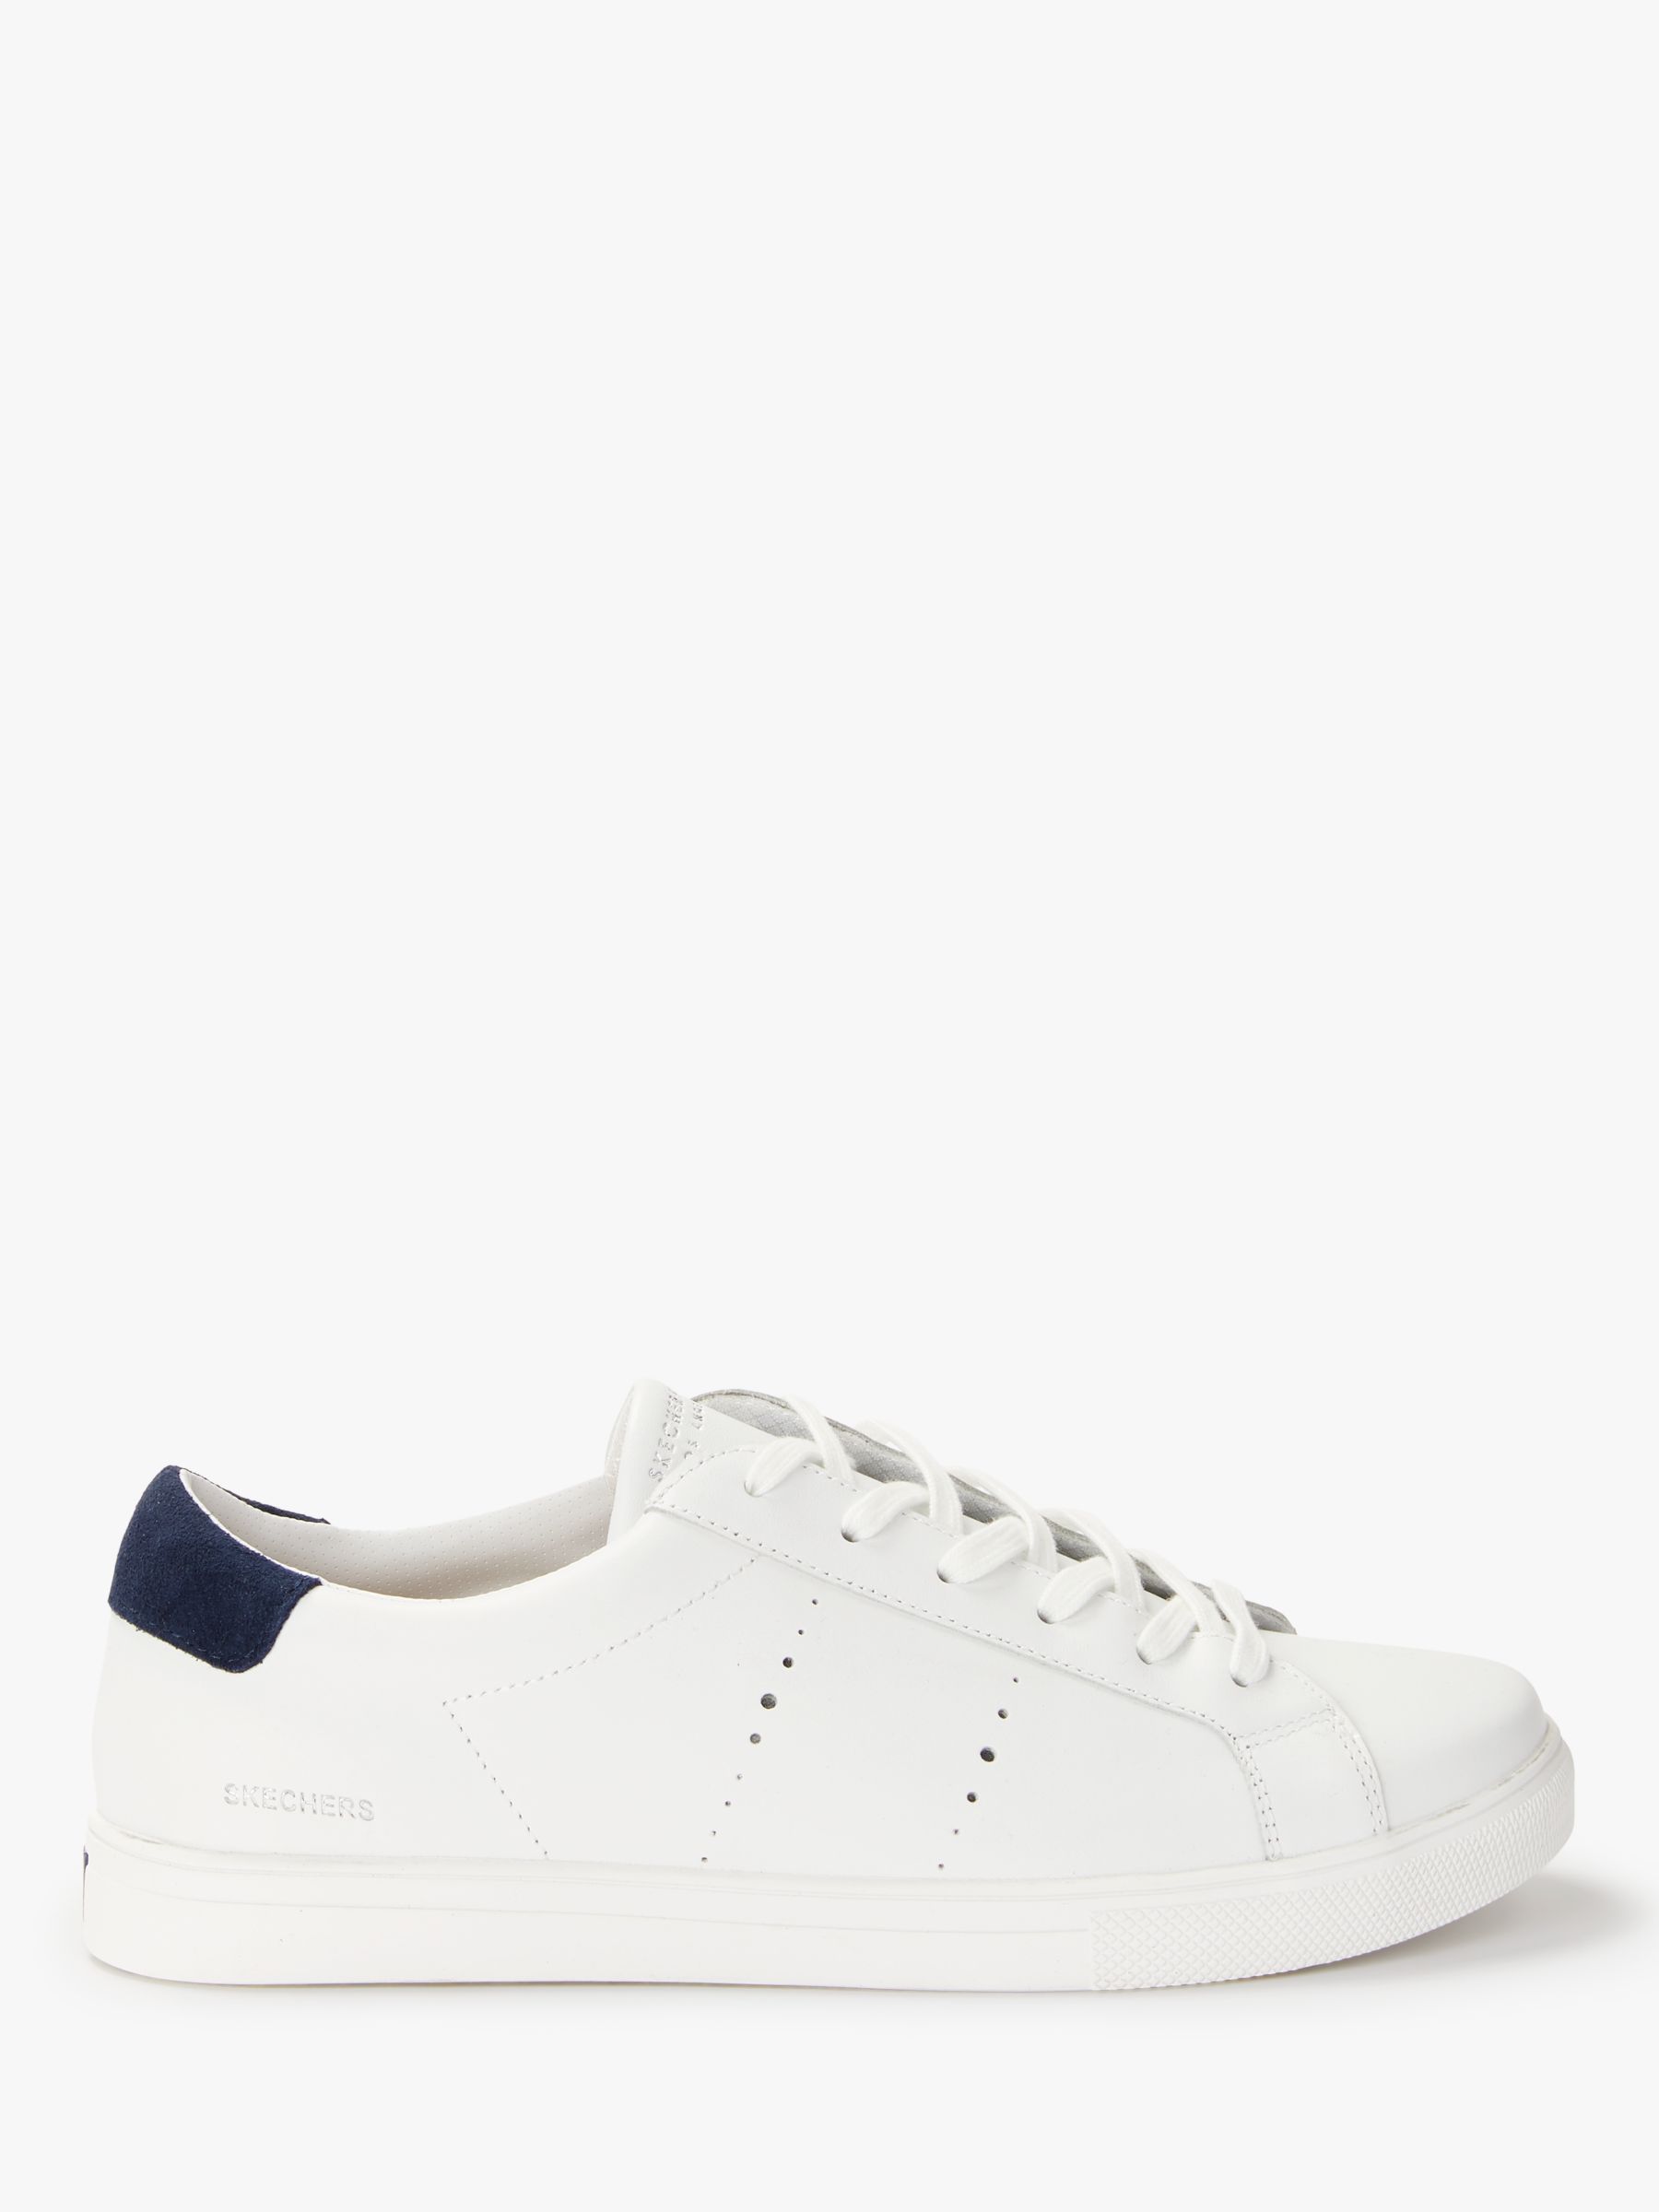 skechers white leather sneakers